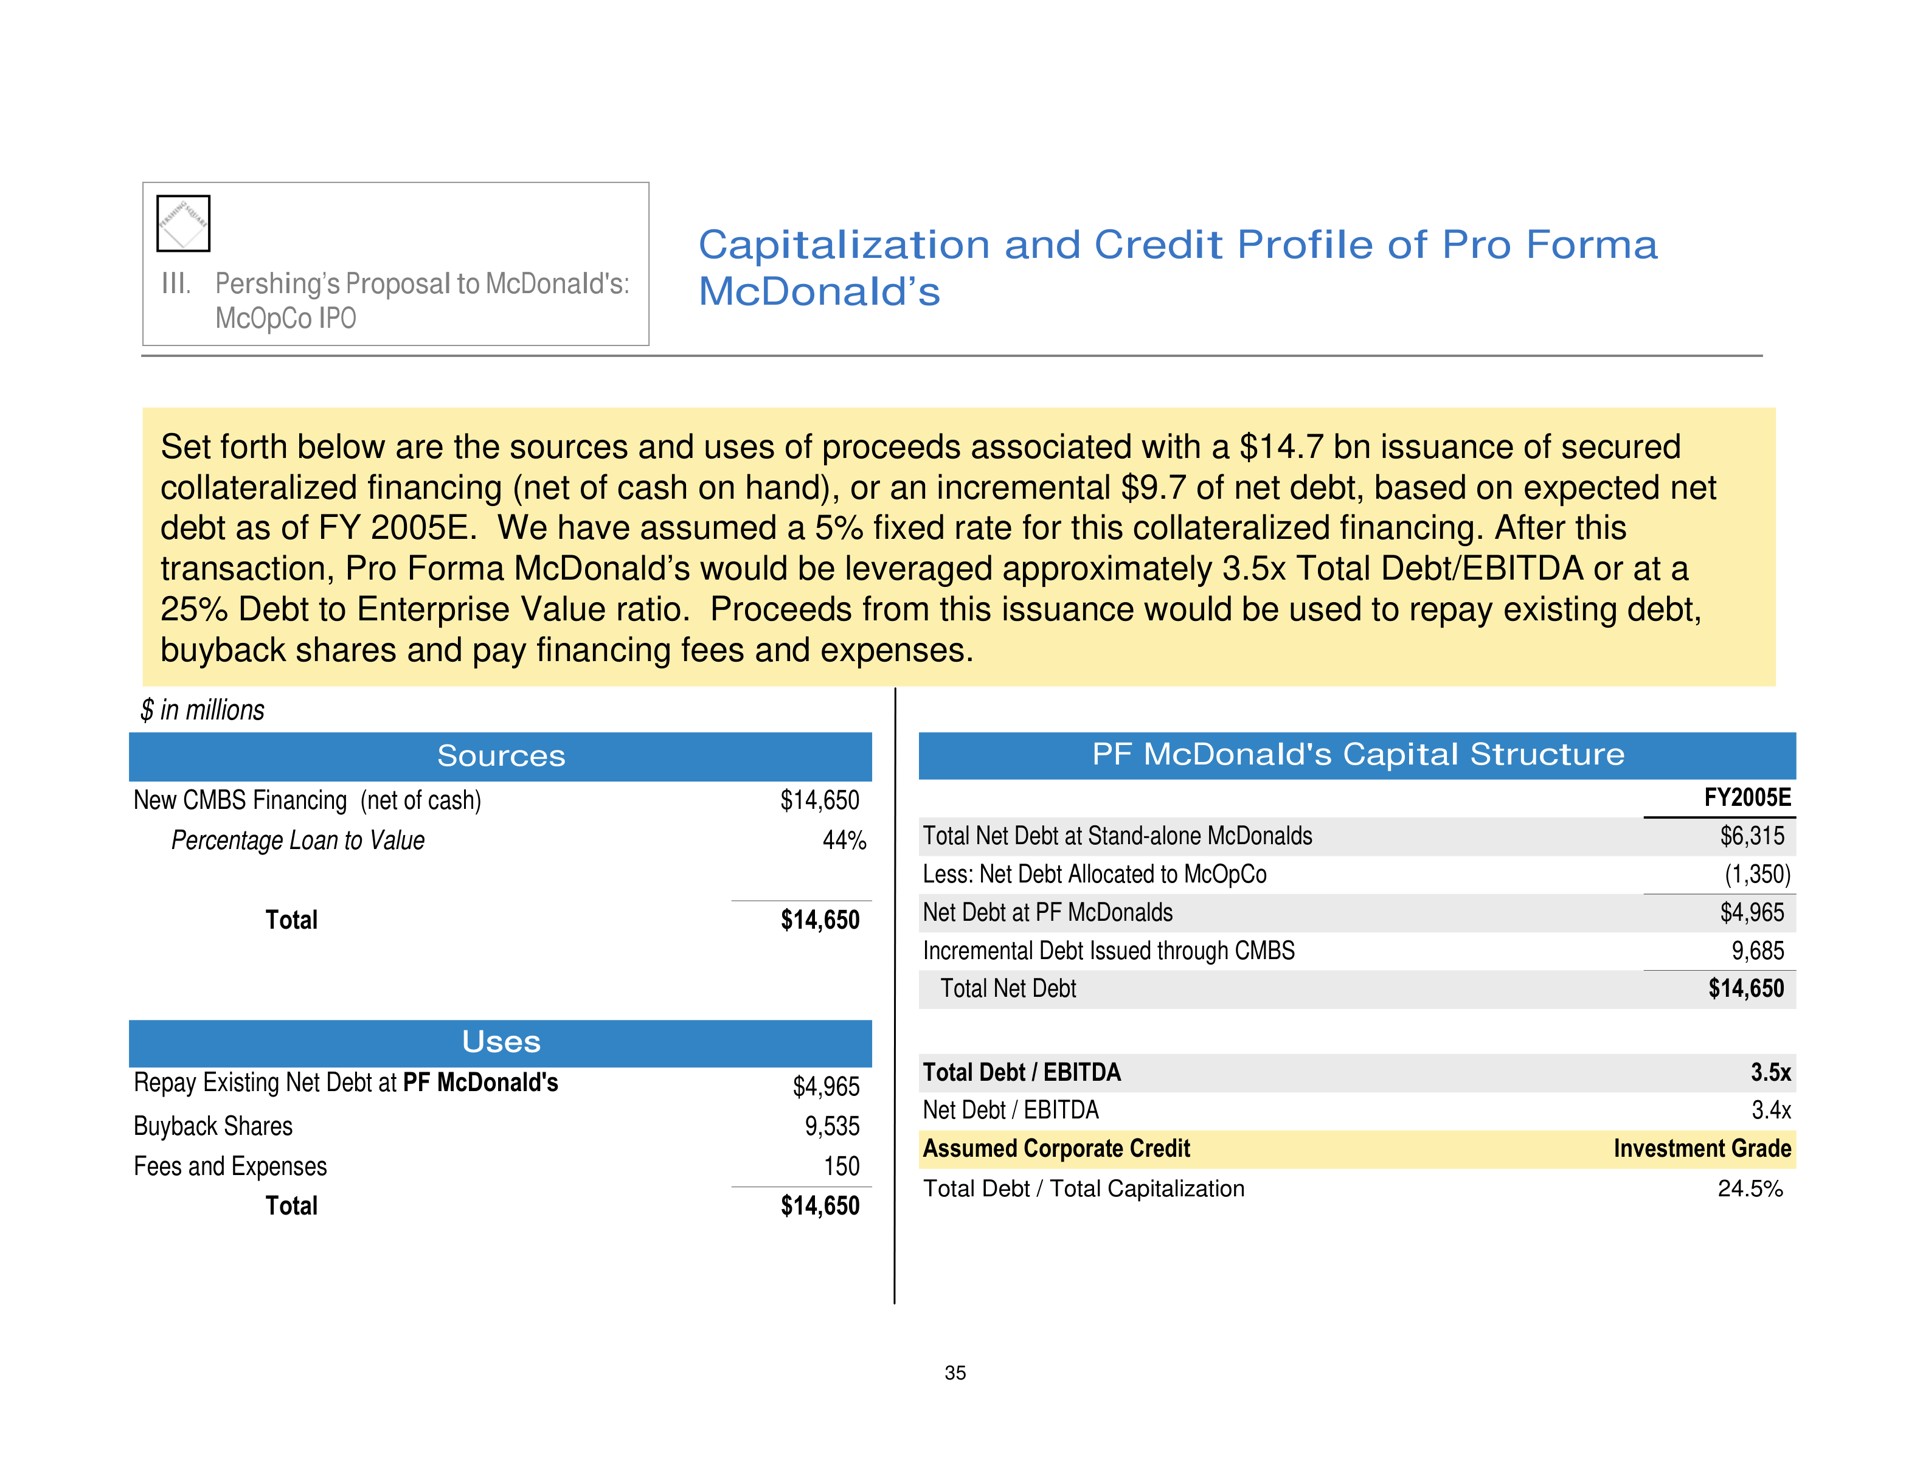 capitalization and credit profile of pro set forth below are the sources and uses of proceeds associated with a issuance of secured financing net of cash on hand or an incremental of net debt based on expected net debt as of we have assumed a fixed rate for this financing after this transaction pro would be leveraged approximately total debt or at a debt to enterprise value ratio proceeds from this issuance would be used to repay existing debt shares and pay financing fees and expenses | Pershing Square